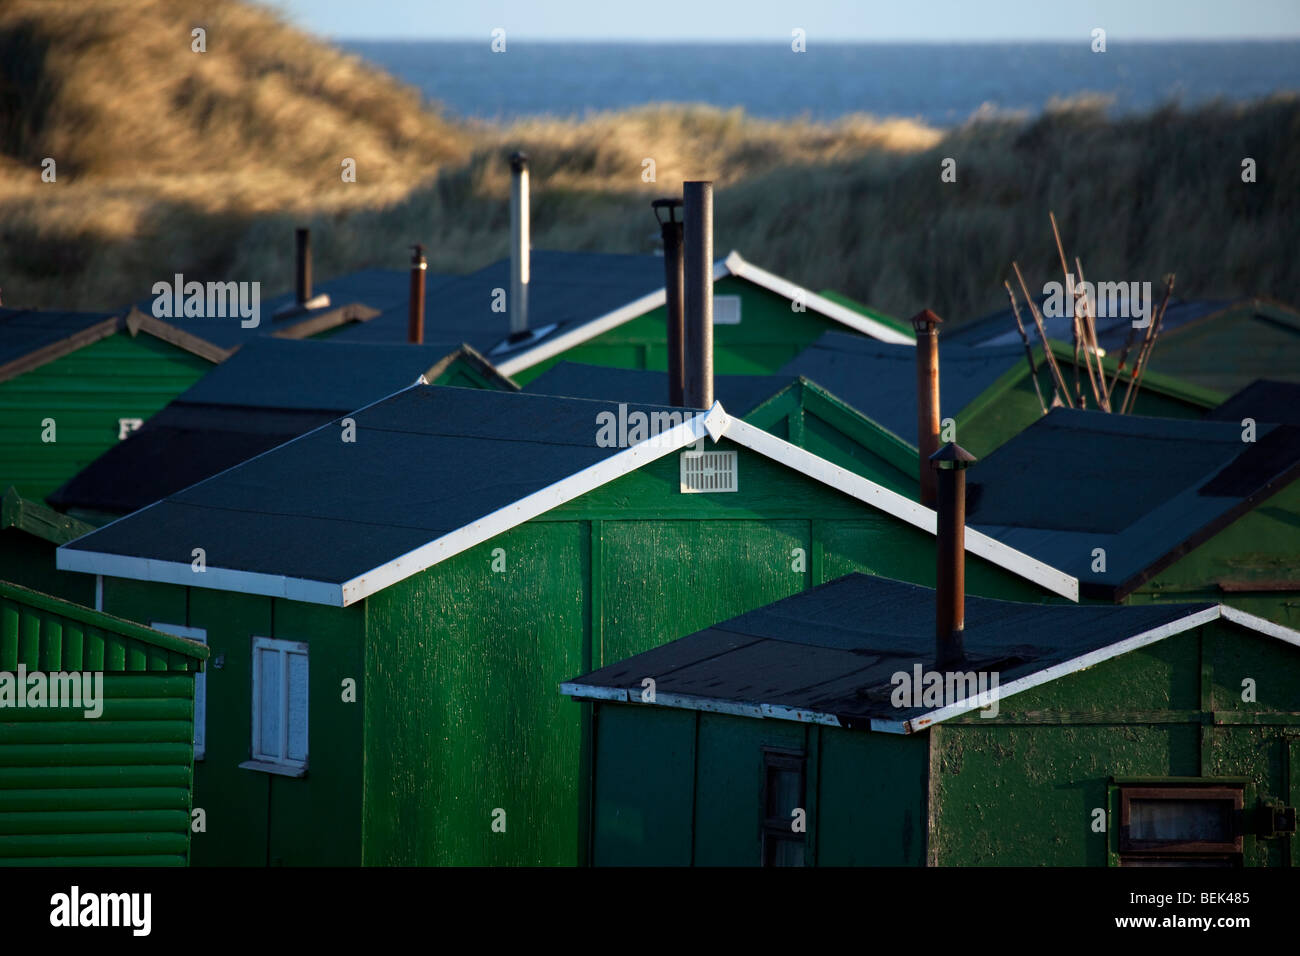 Several Tarpaulin roofed Fisherman's huts with chimneys; A hundred “South Gare Fishermen’s Association” cabins. Multiple sheds with doors & windows Stock Photo